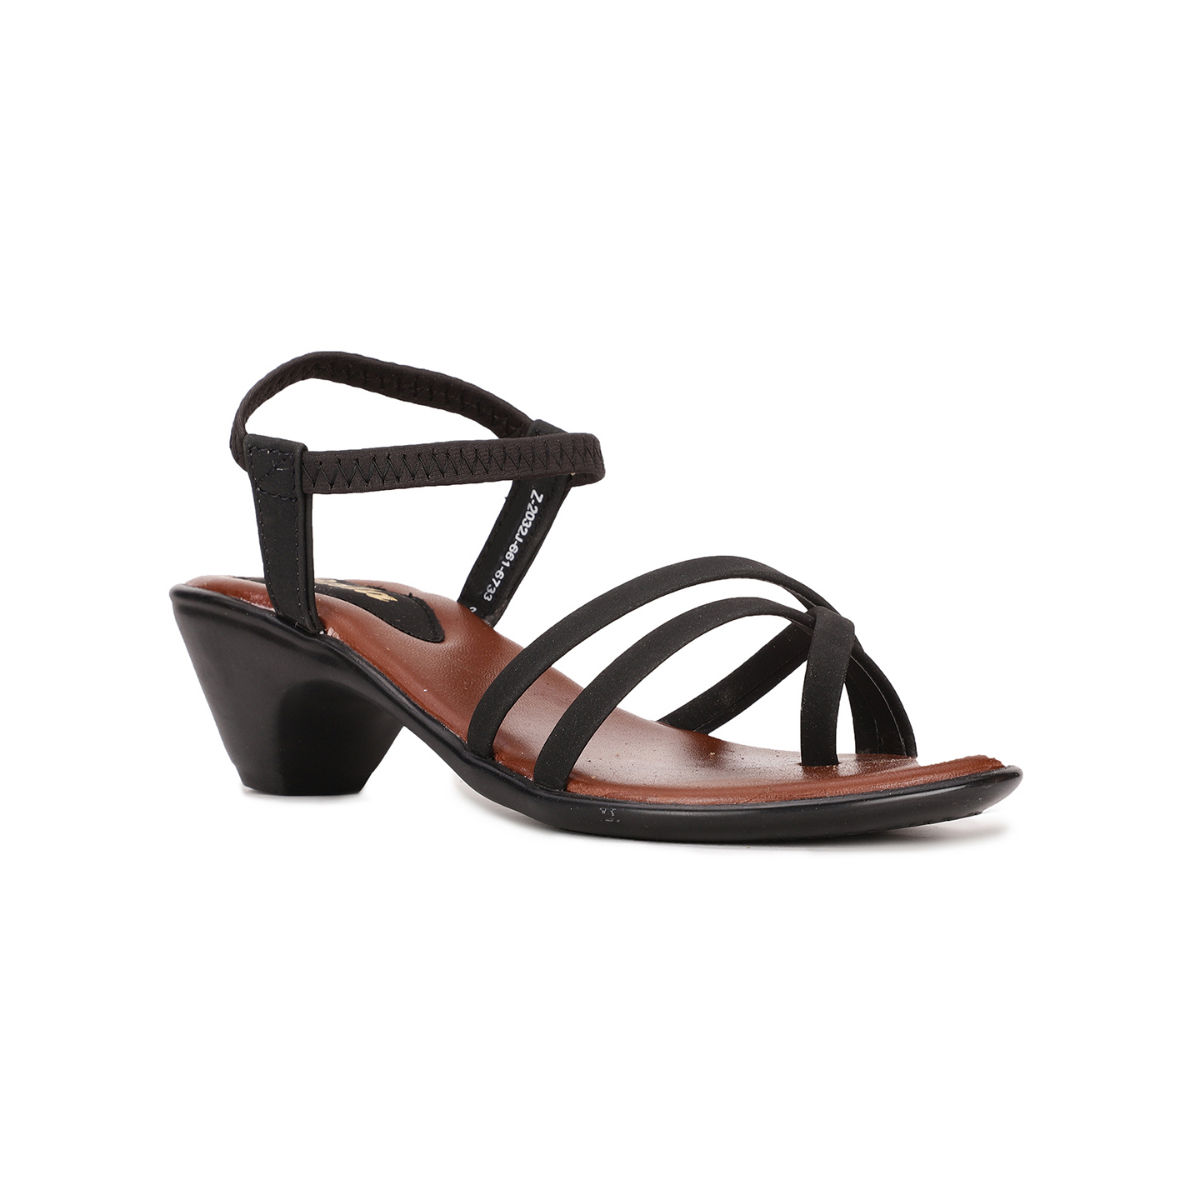 Buy Bata Sandals For Women  Black  Online at Low Prices in India   Paytmmallcom